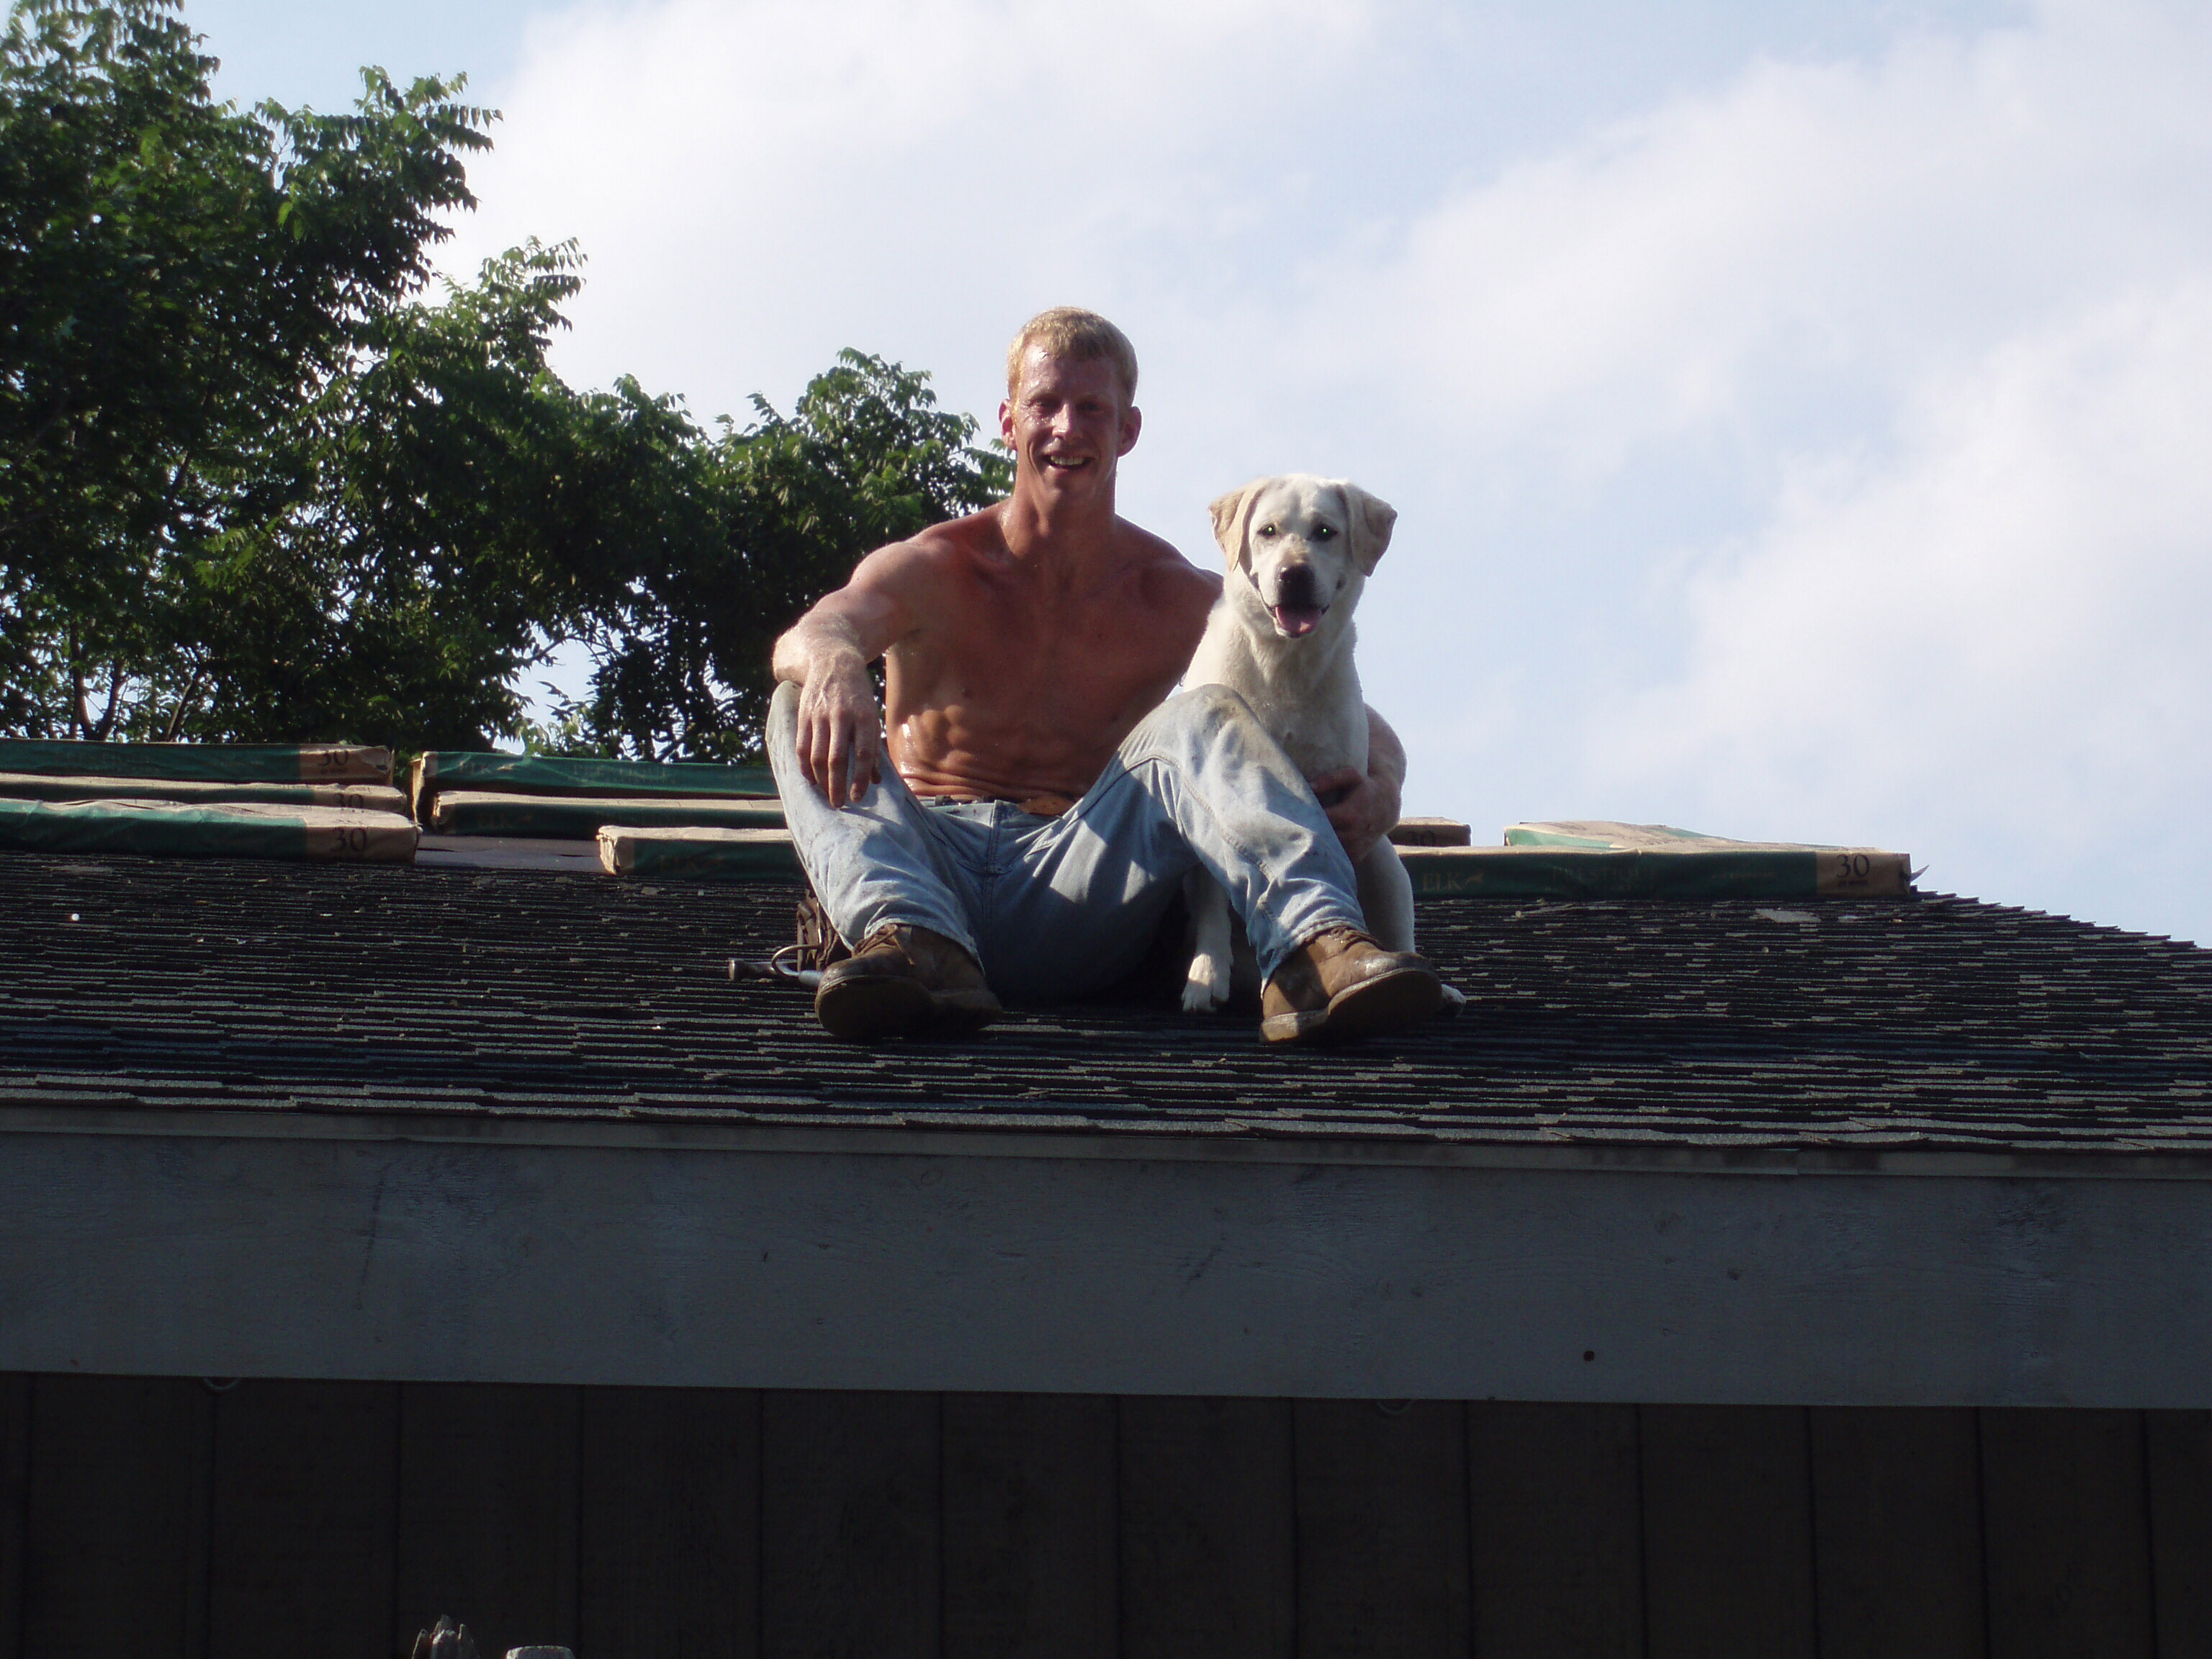 152. Josie the roofer For more Gre